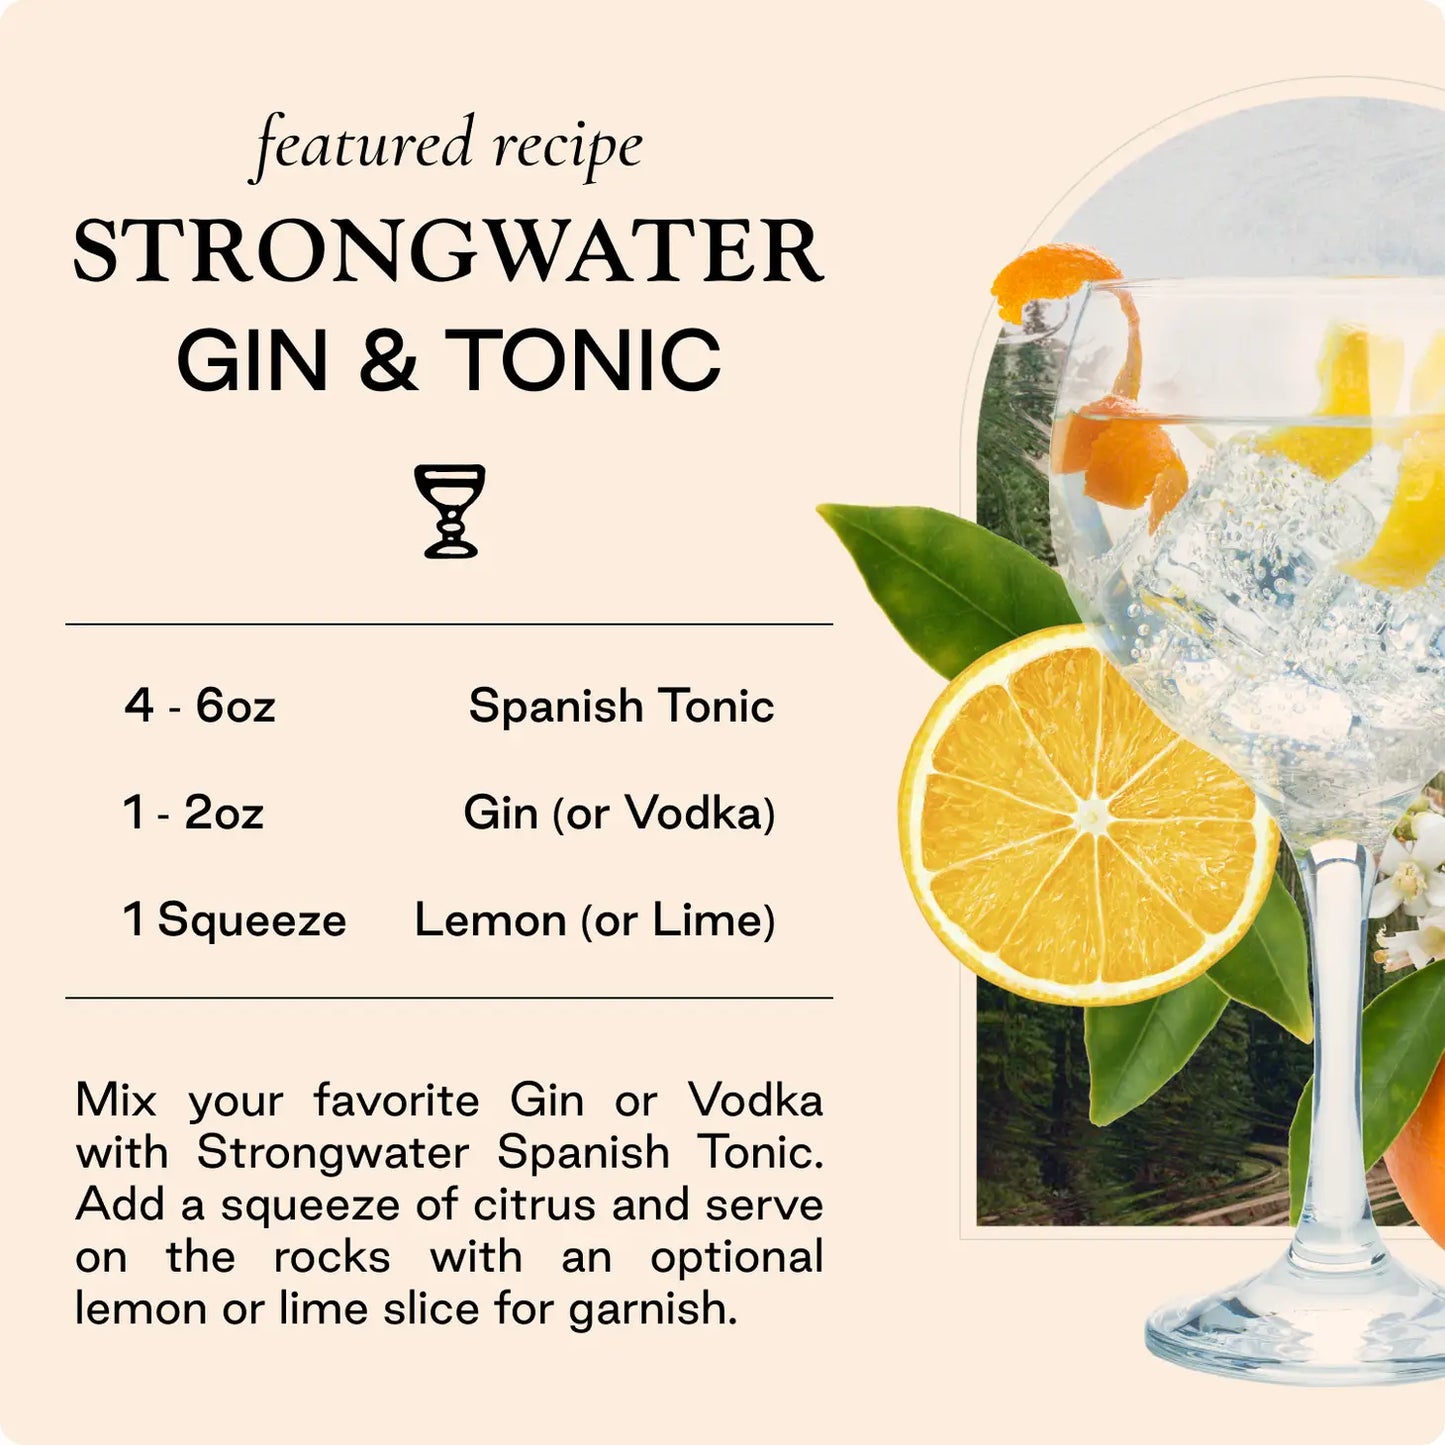 featured recipe using Strongwater Gin & Tonic